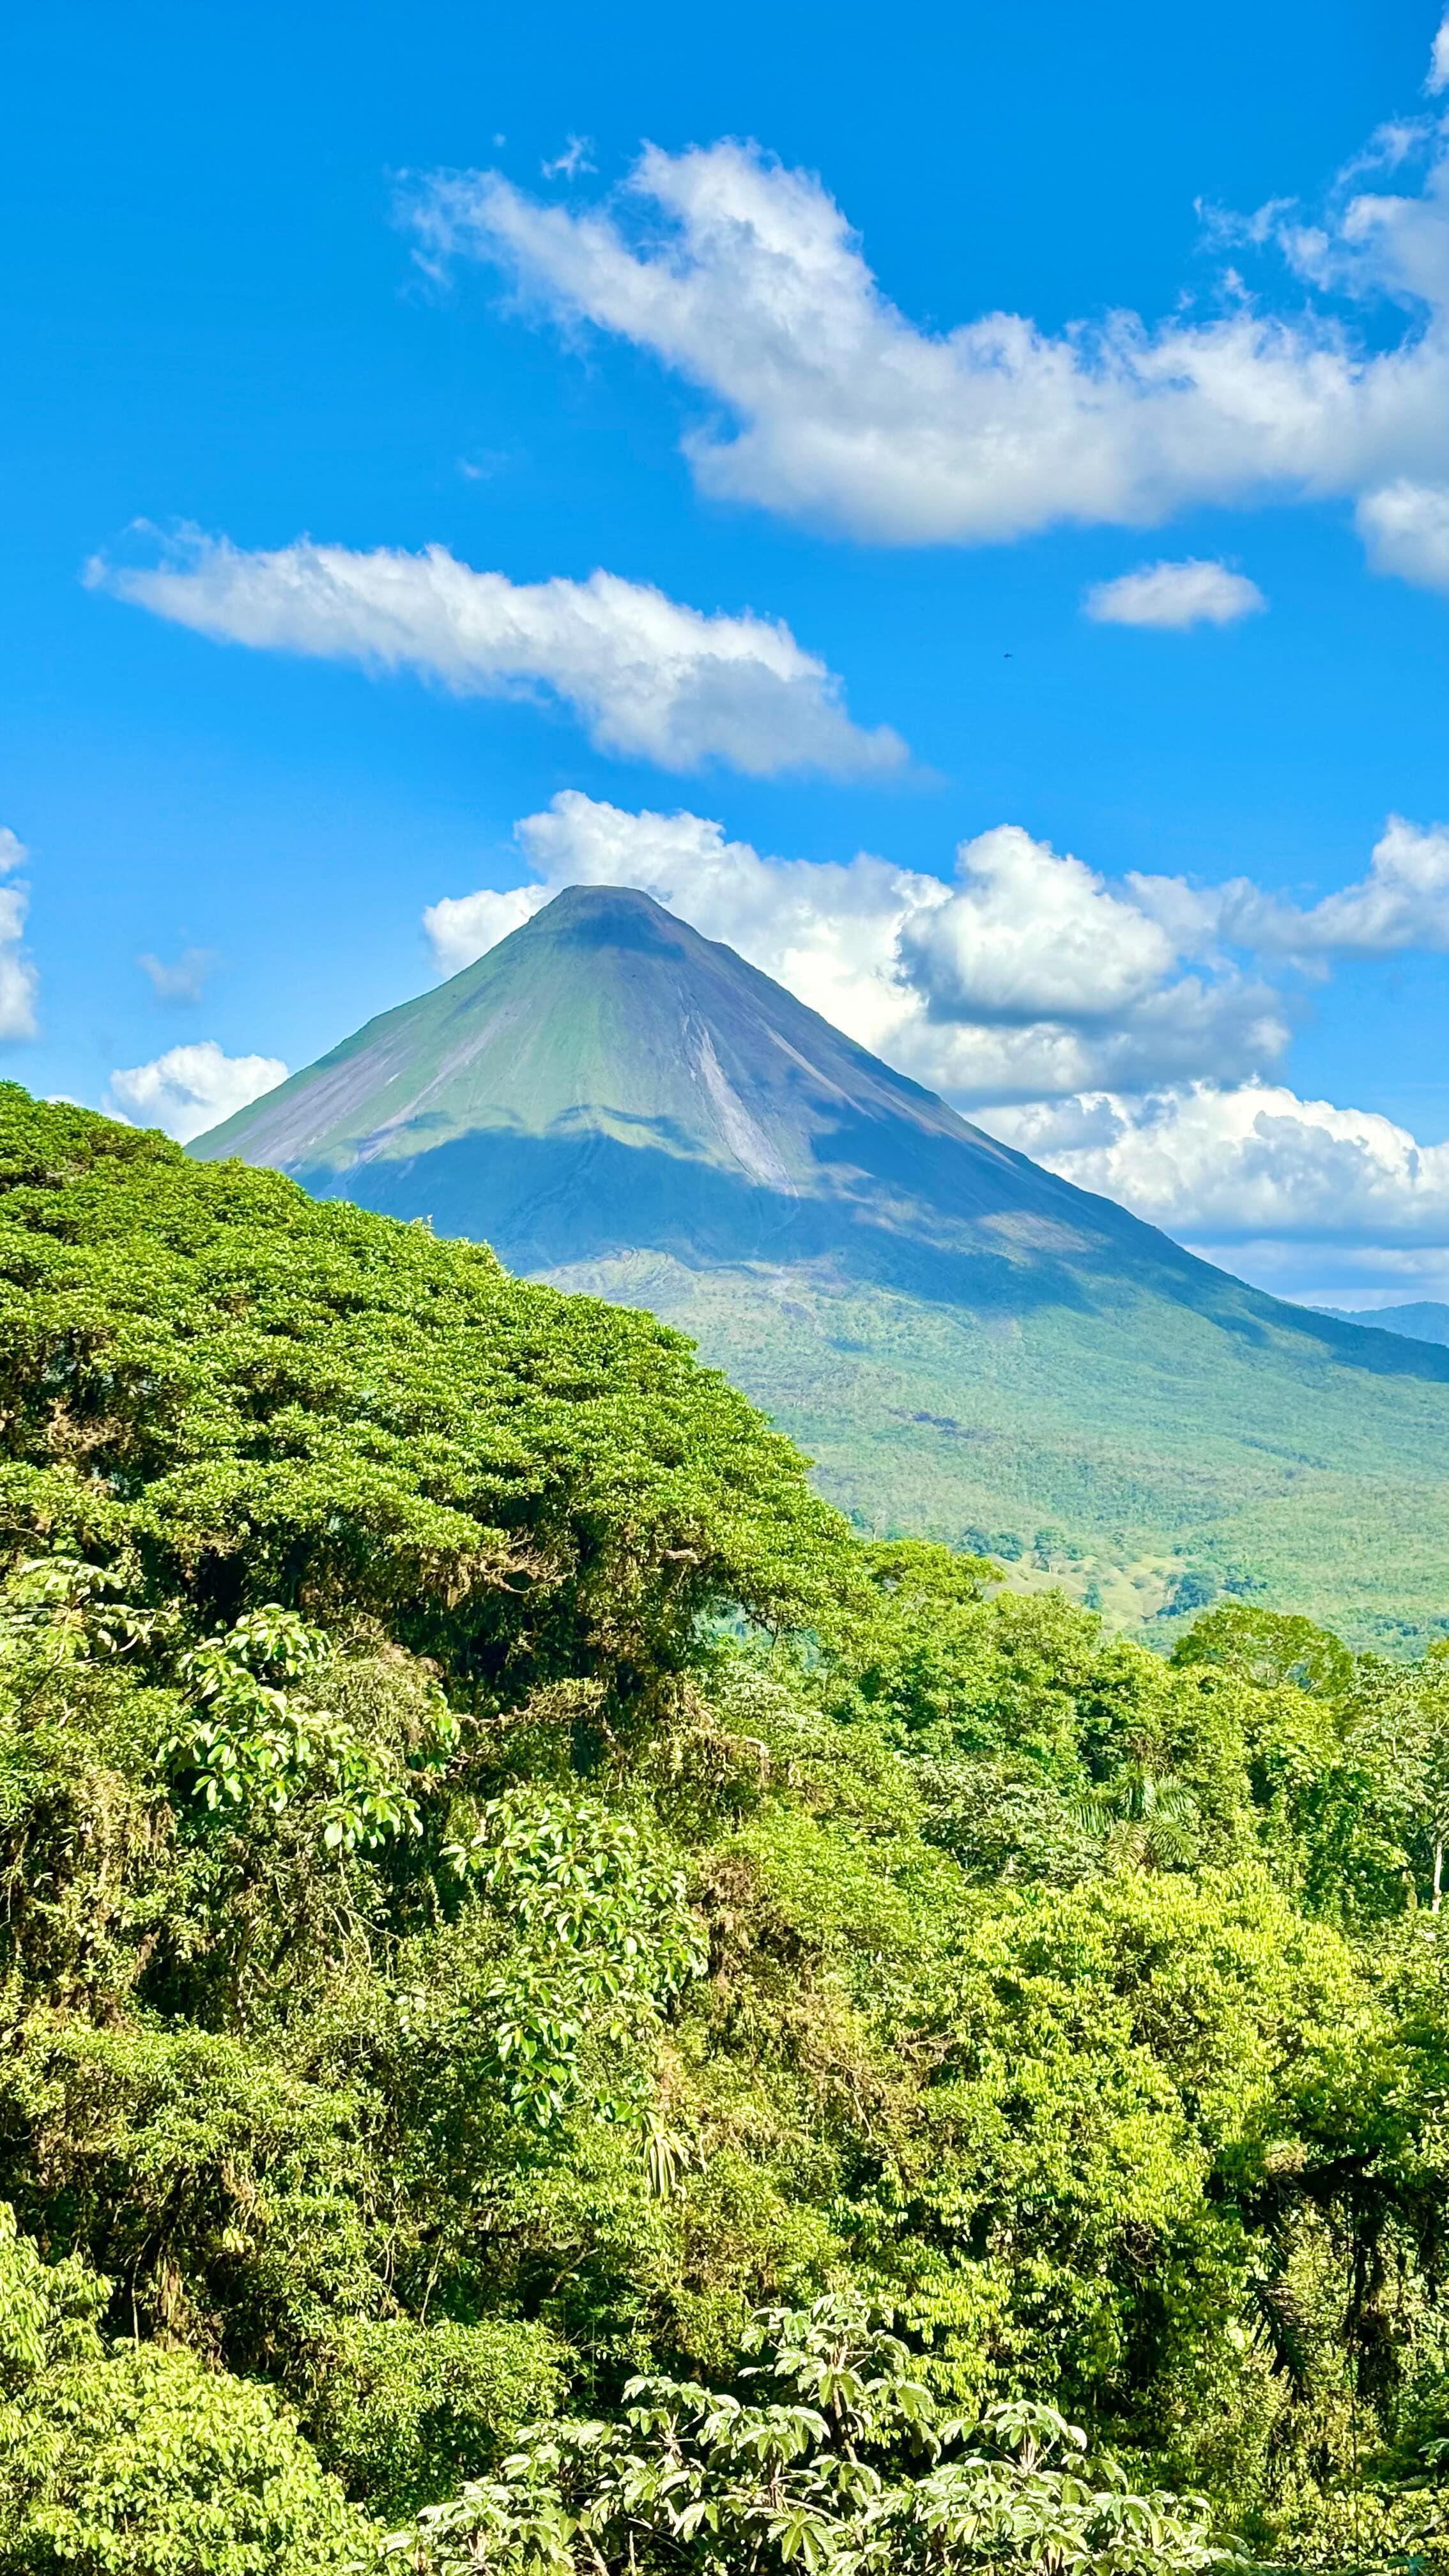 The view of Arenal Volcano from Mistico Arenal Hanging Bridges Park in La Fortuna, Costa Rica 📍🌎

Fun fact: Arenal Volcano was active from 1968-2010! It’s Costa Rica’s youngest and most active volcano 🌋

#travelgram #costarica #volcano #myview #familytravel #mytinyatlas #wanderlust #outdoorliving #hike #vacationviews #exploremore